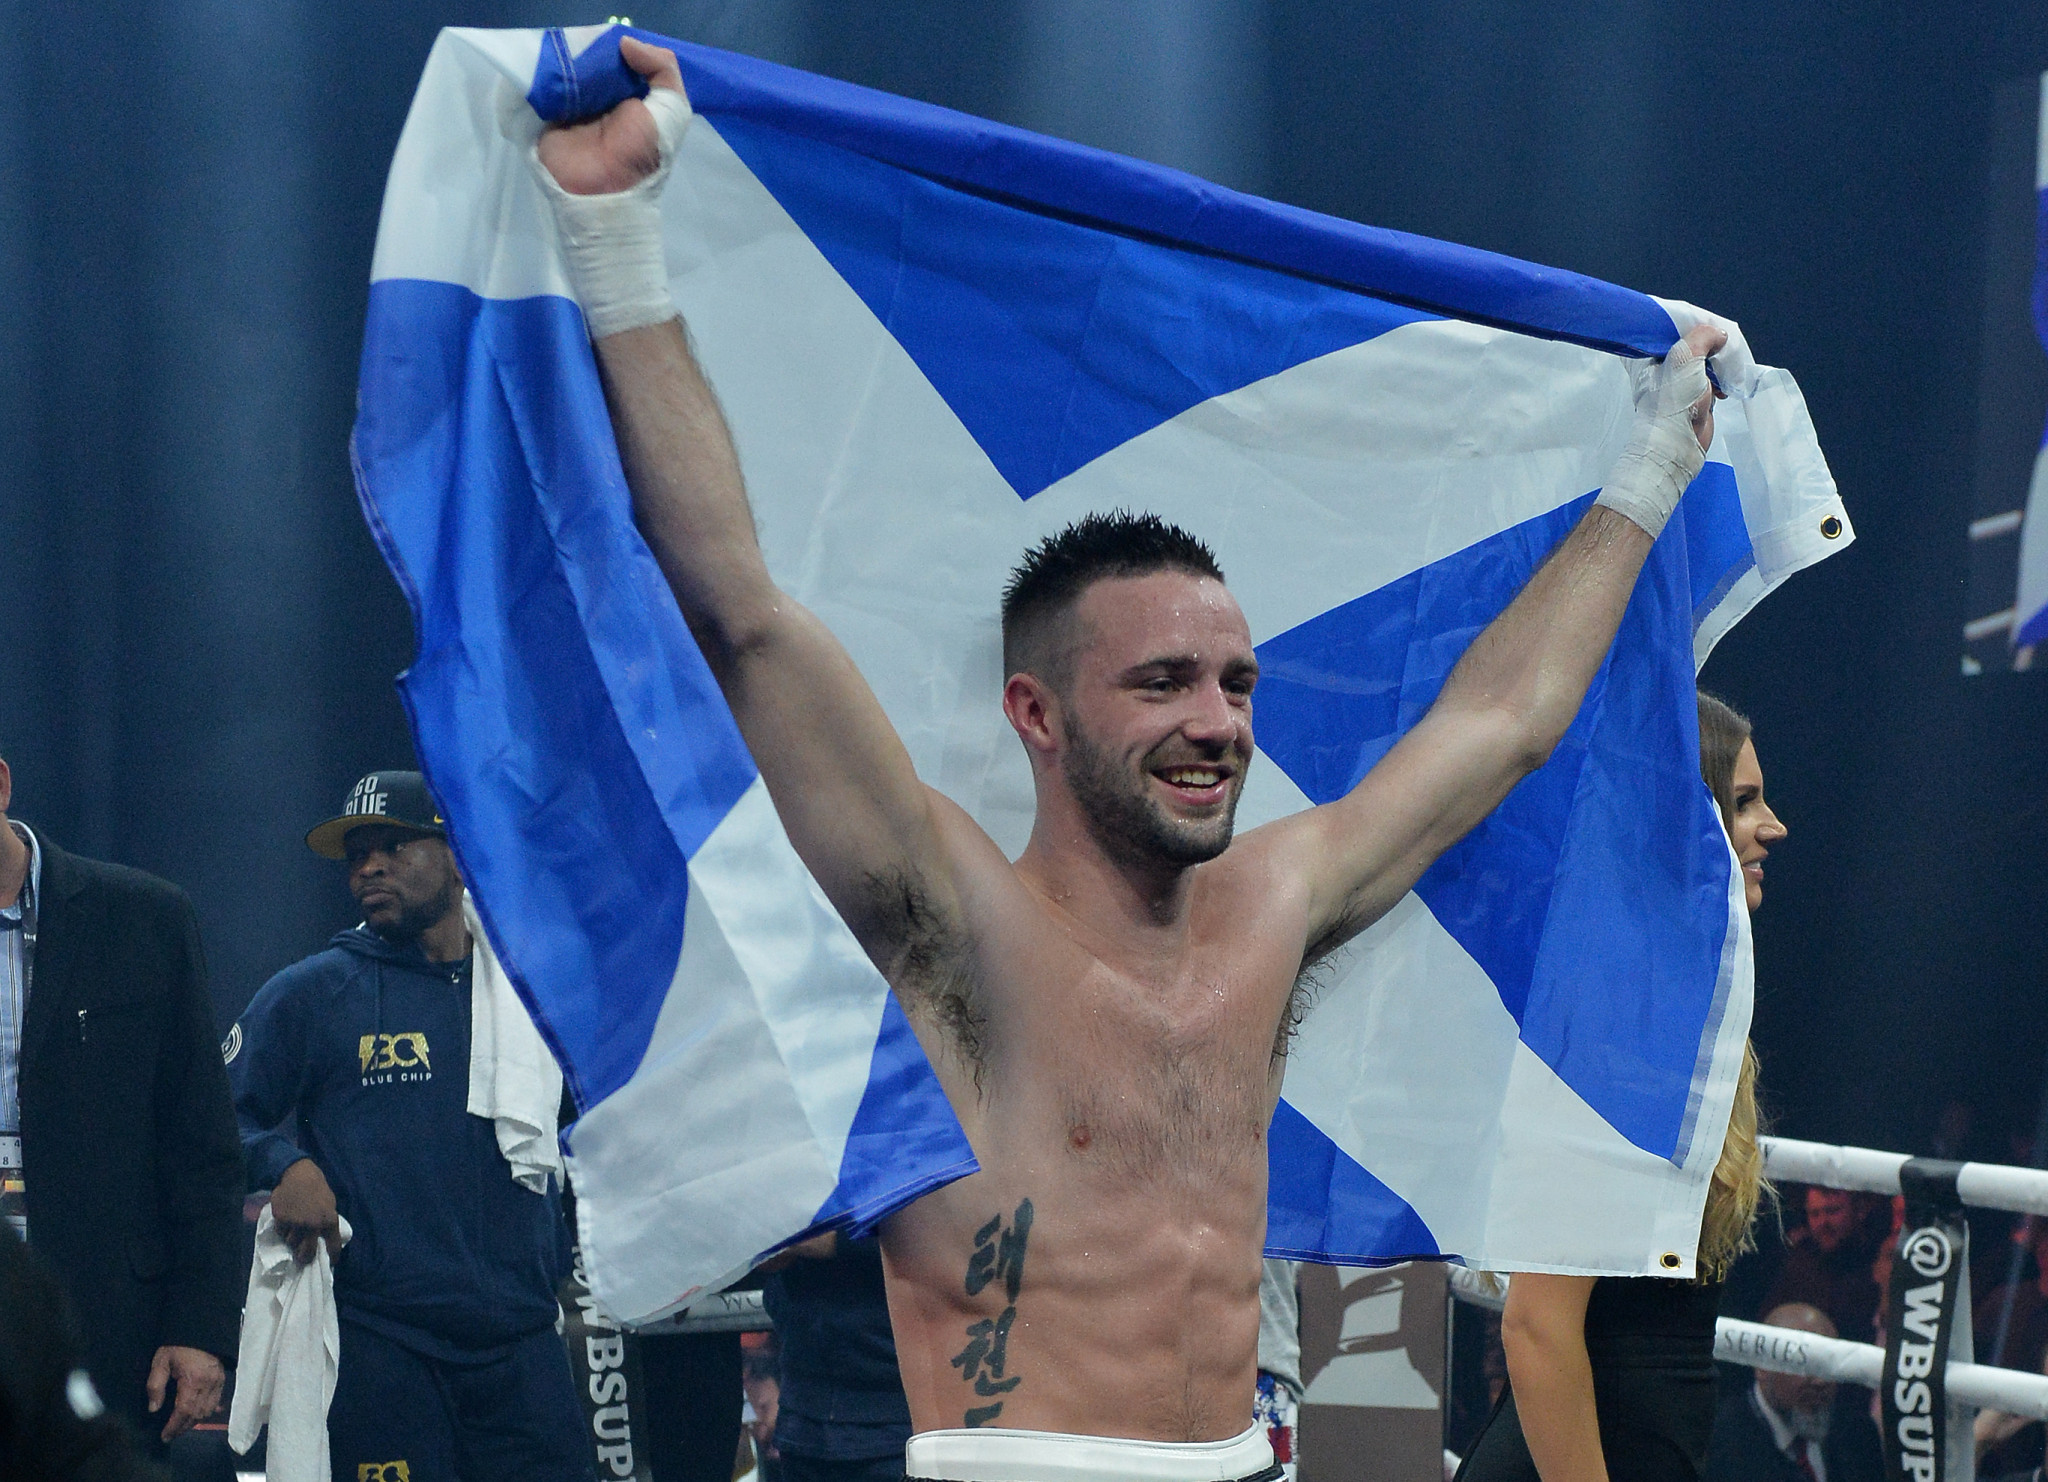 Boxer Josh Taylor has been excelling in the ring for Scotland ©Getty Images